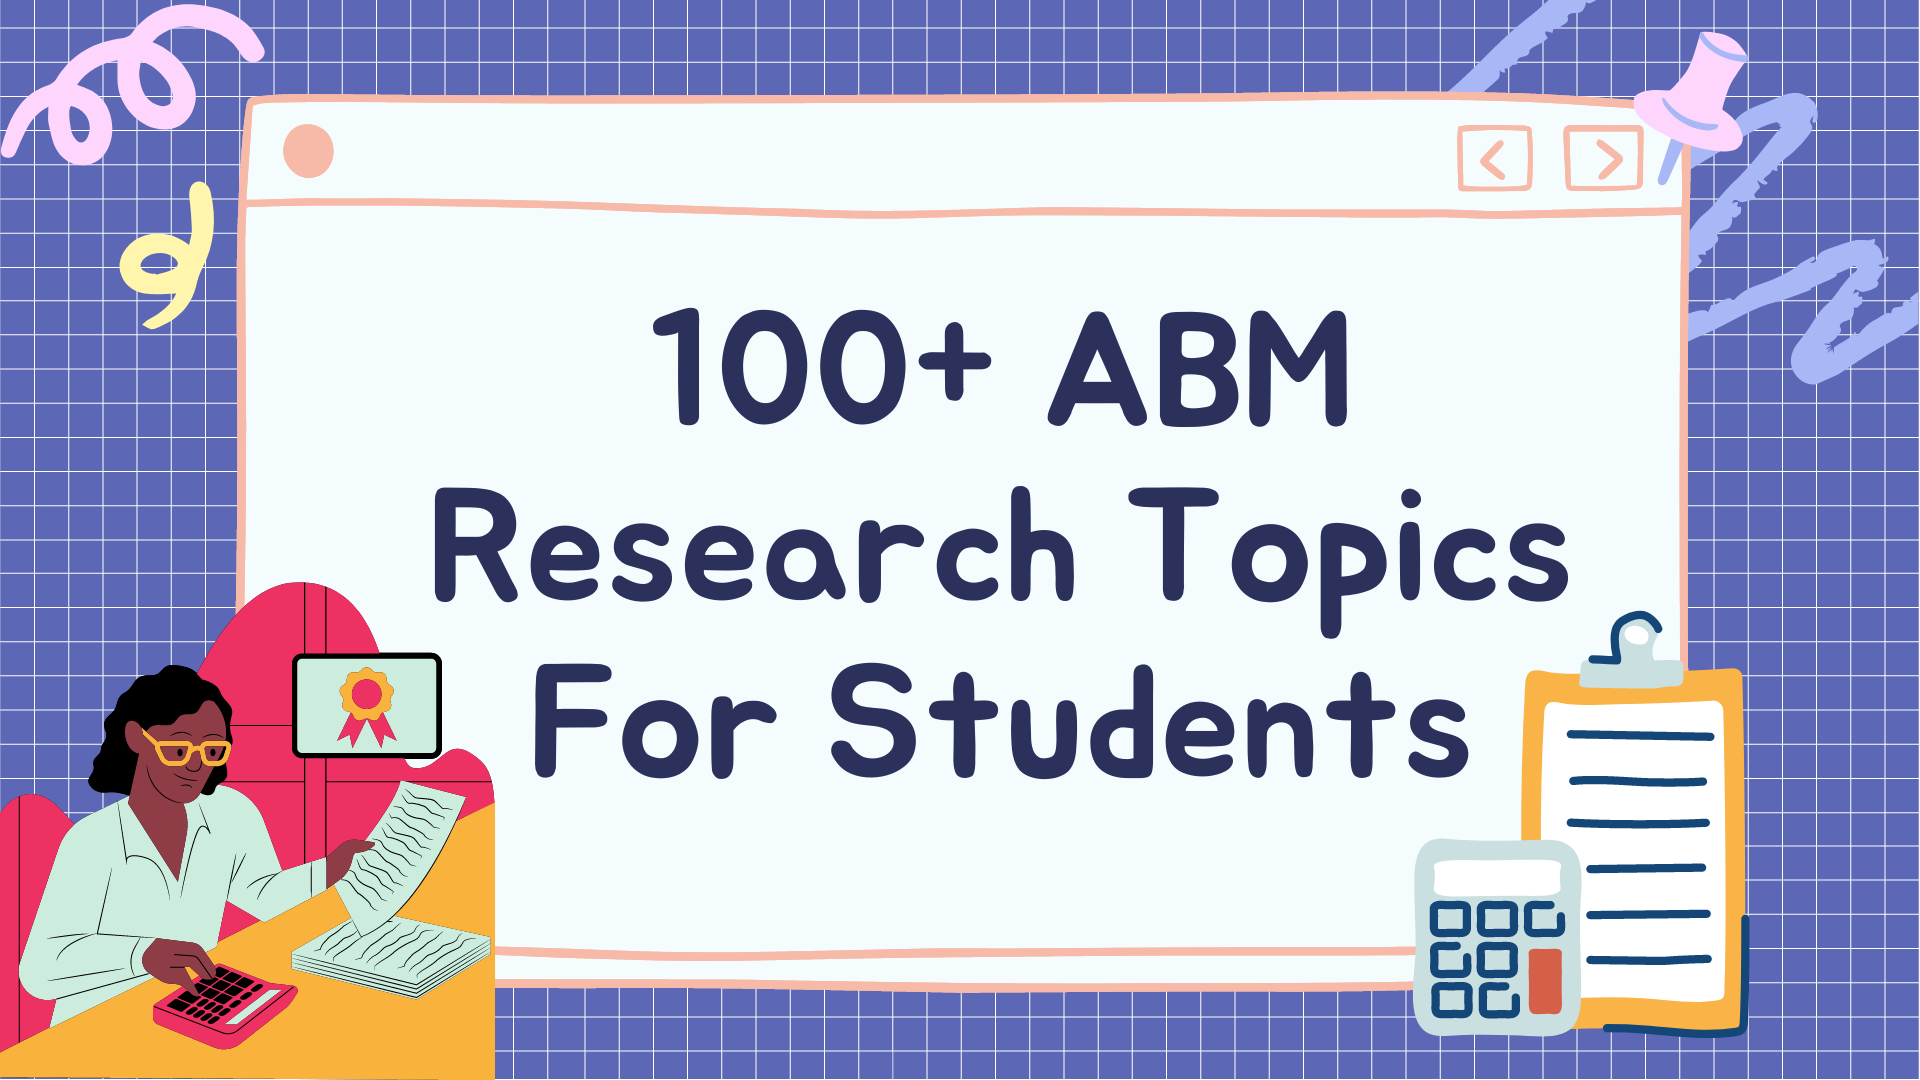 ABM Research Topics For Students